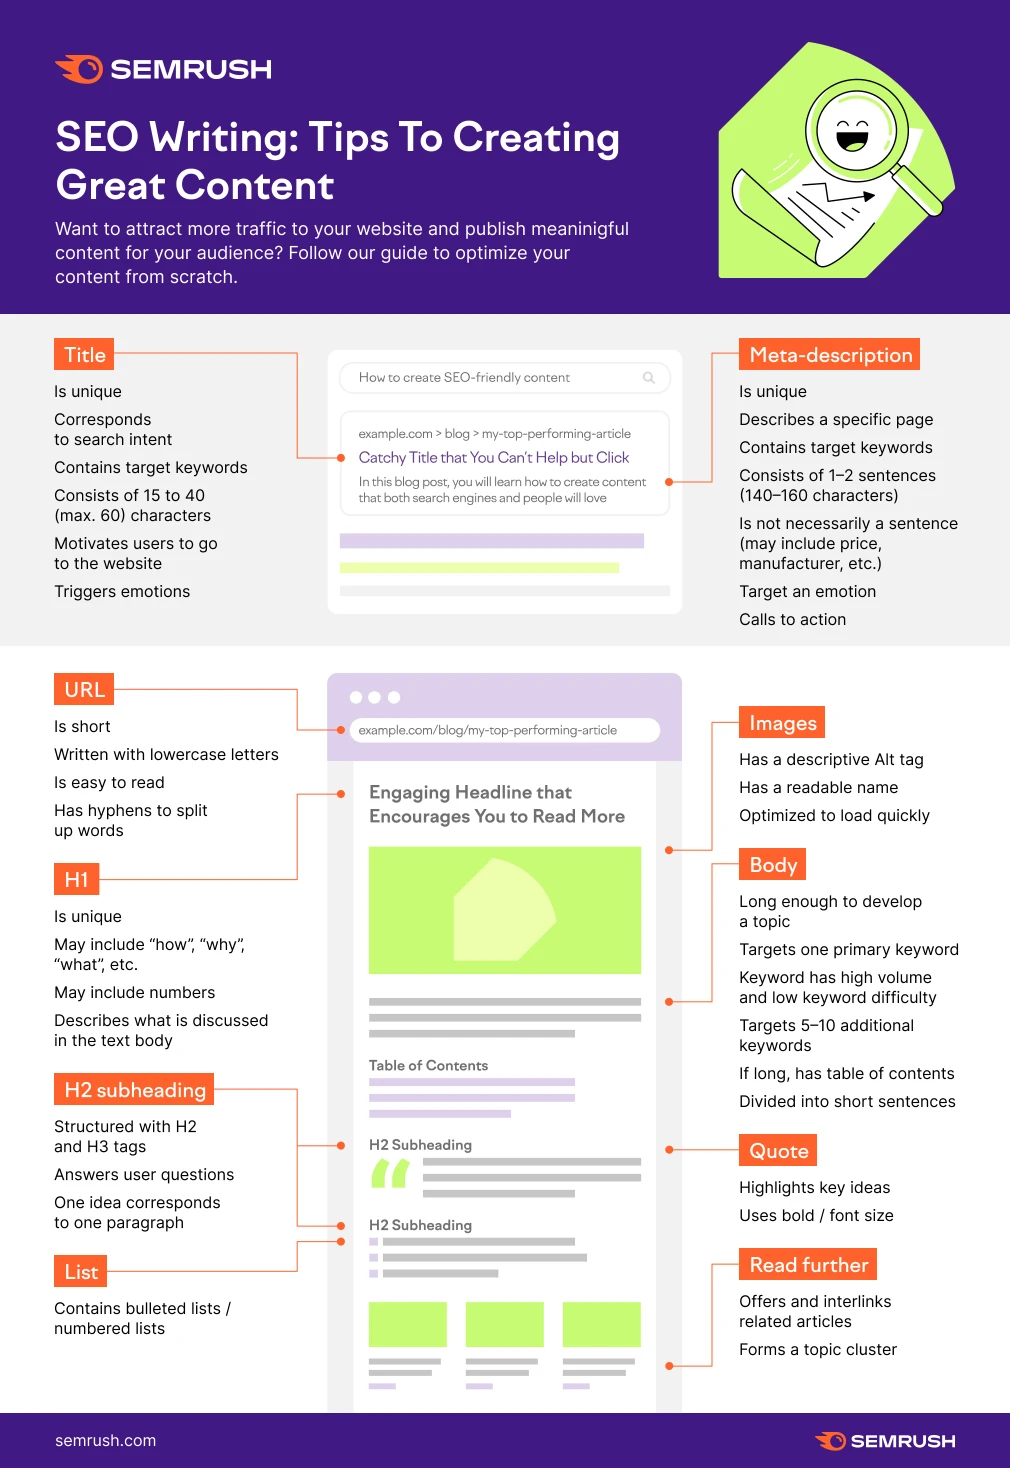 SEO writing best practices infographic